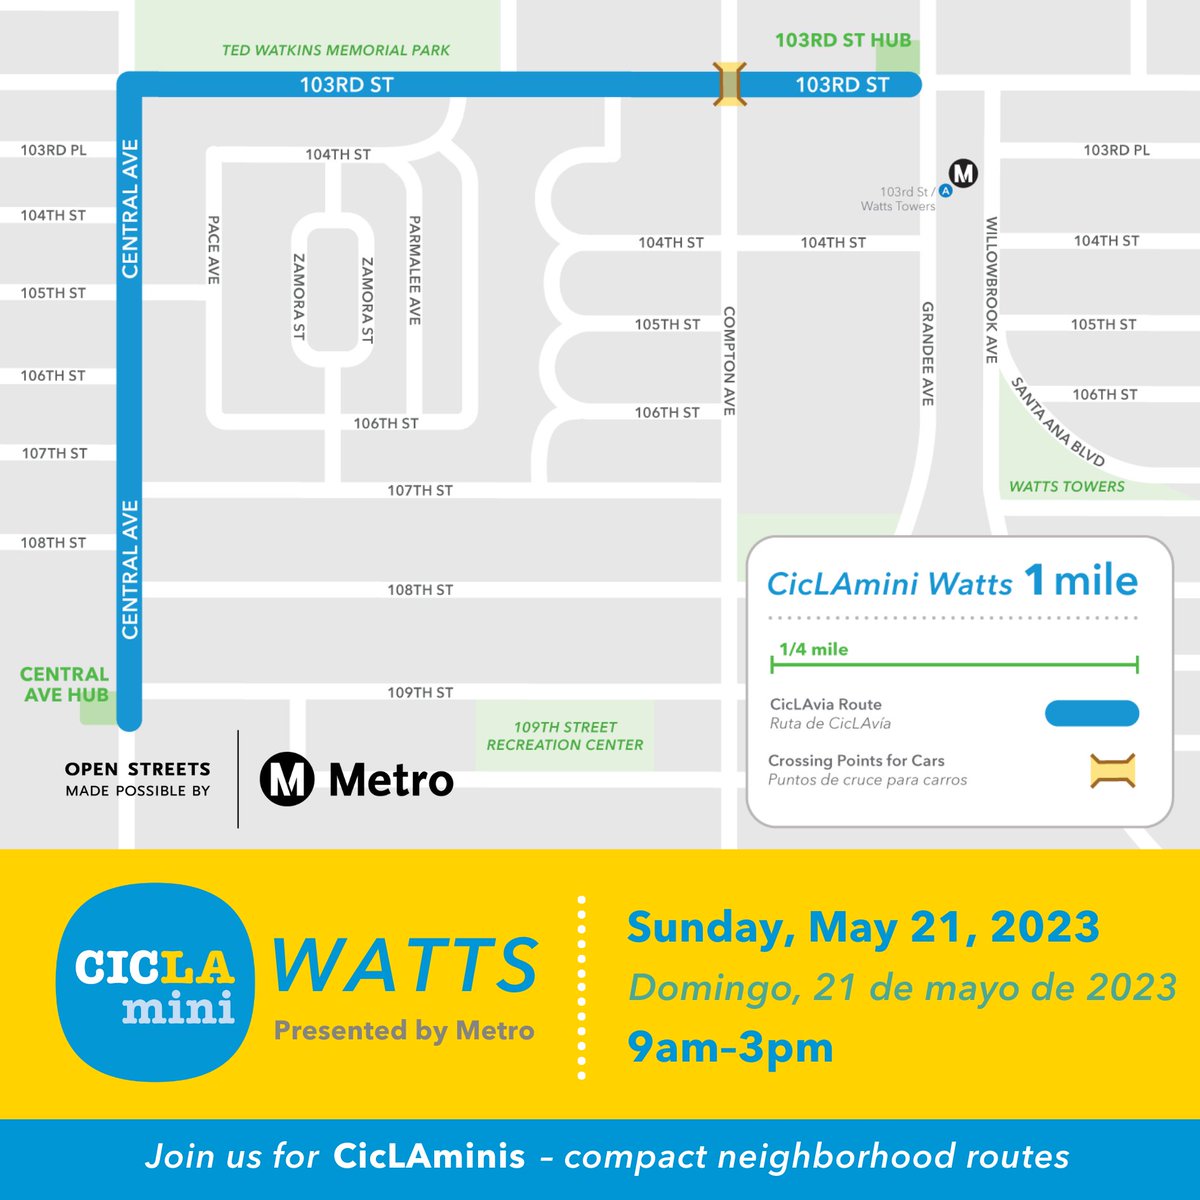 The 📍CicLAmini—Watts route is accessible via Metro A Line (Blue) 🚊. Stop at either the 103rd St / Watts Tower Station (0.4 miles from 103rd St Hub) or the Firestone Station (1.2 miles from 103rd Hub). For more transit info visit: bit.ly/3nTHrTh. @metrolosangeles